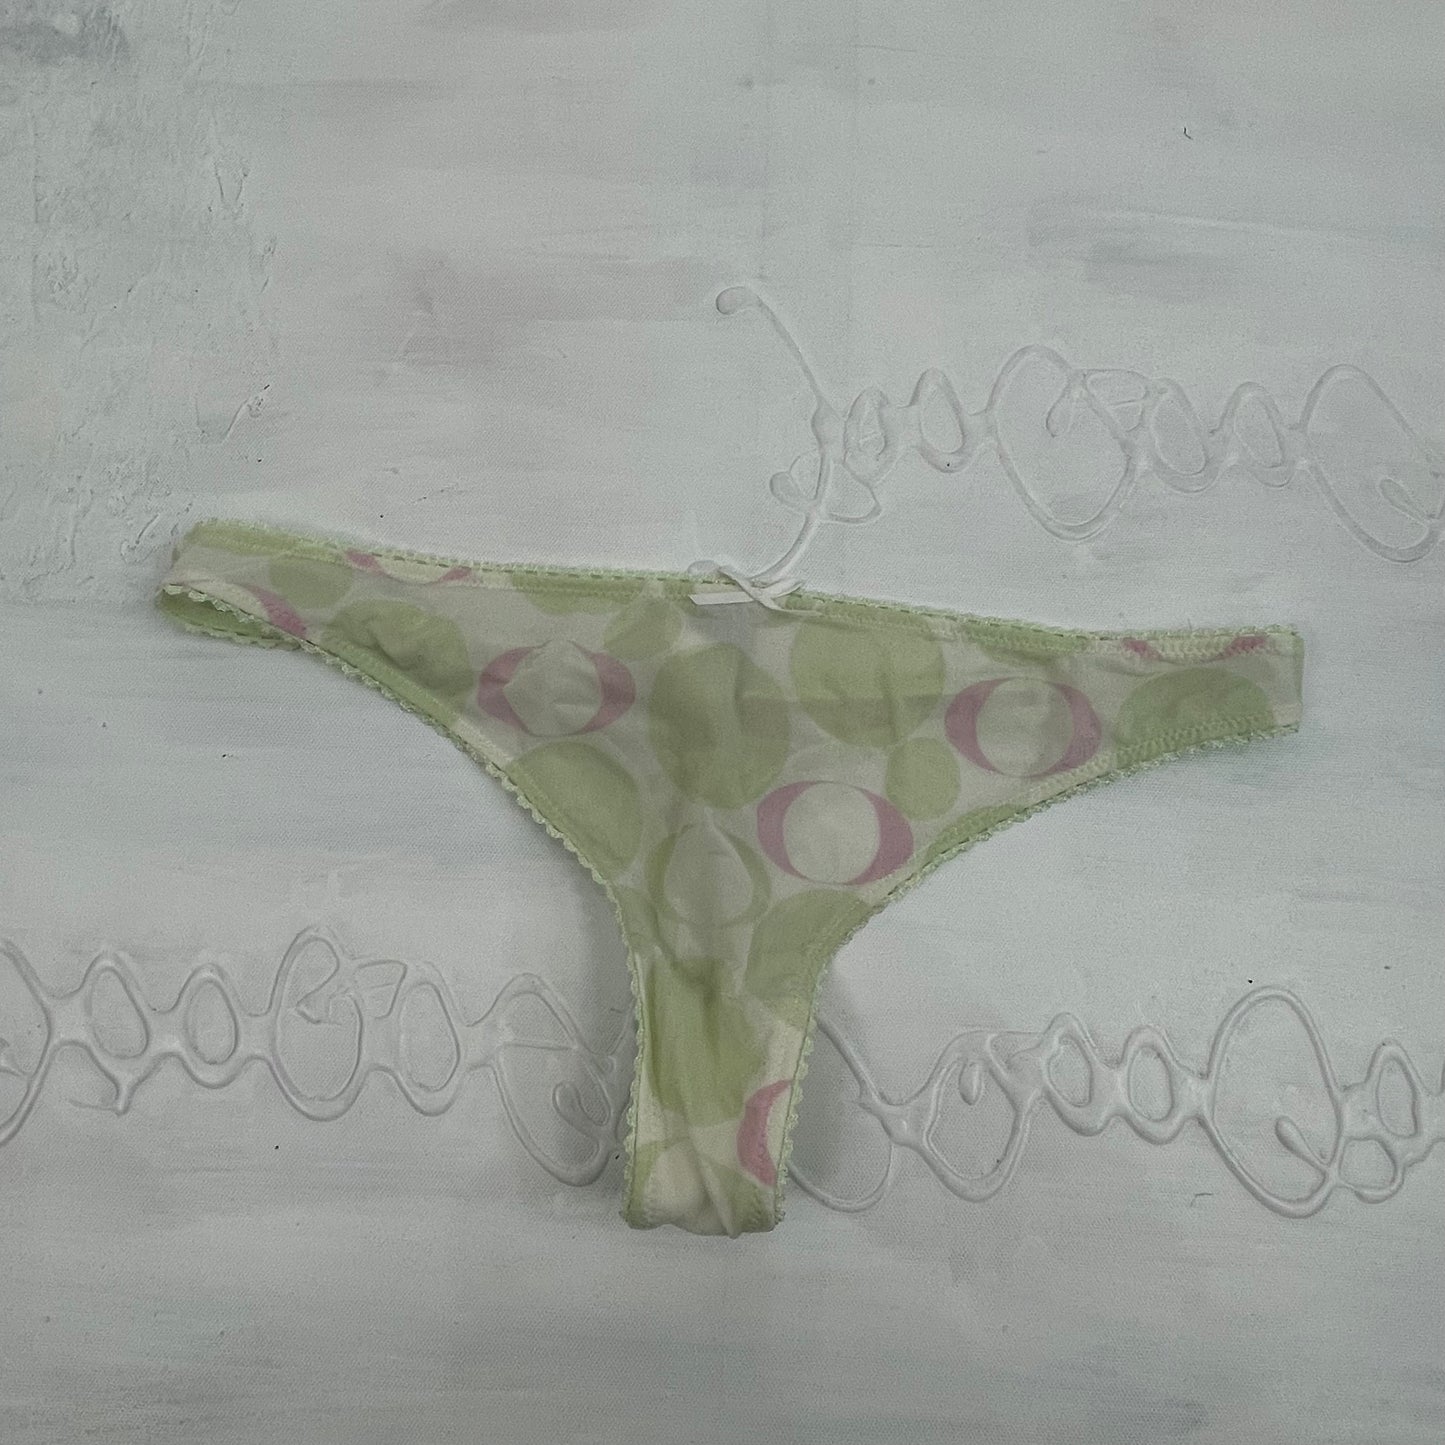 CHALET GIRL DROP | small green mesh patterned thong